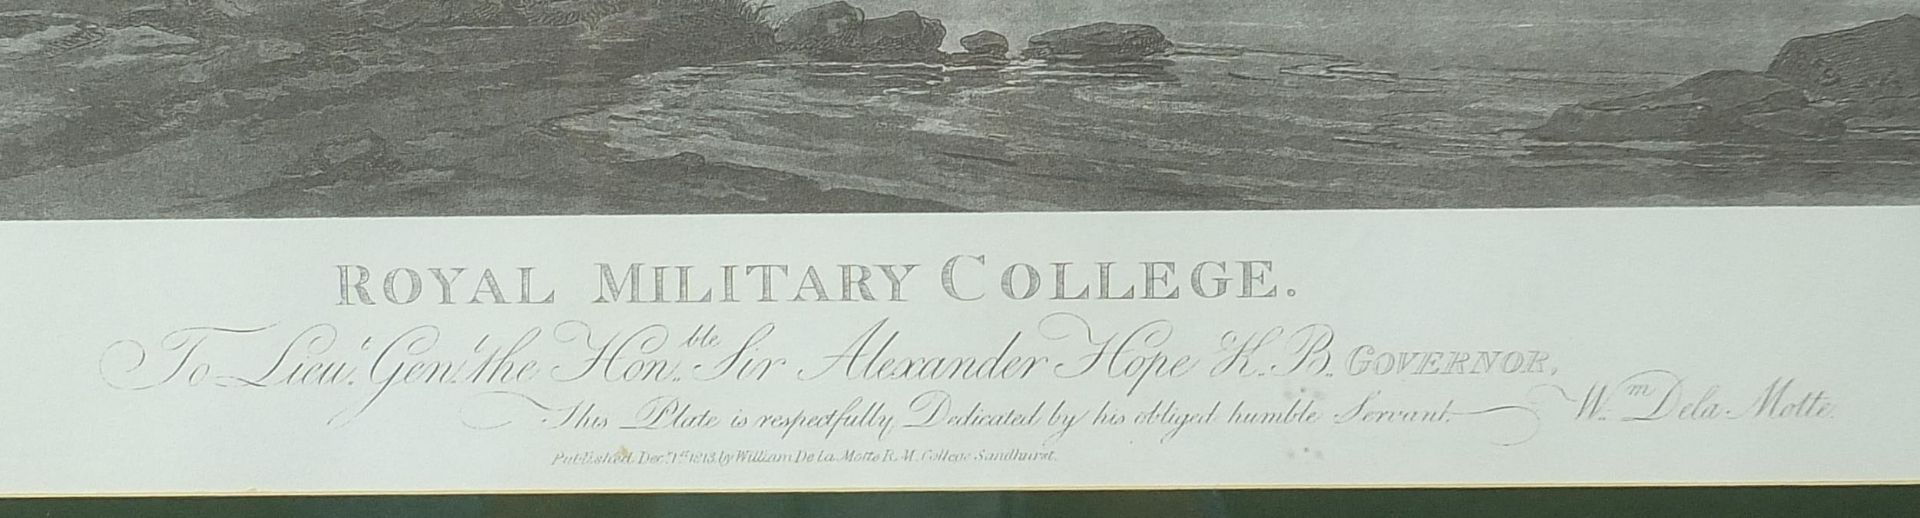 Royal Military College, 19th century print, applied plaque to the mount, mounted, framed and glazed, - Image 3 of 7